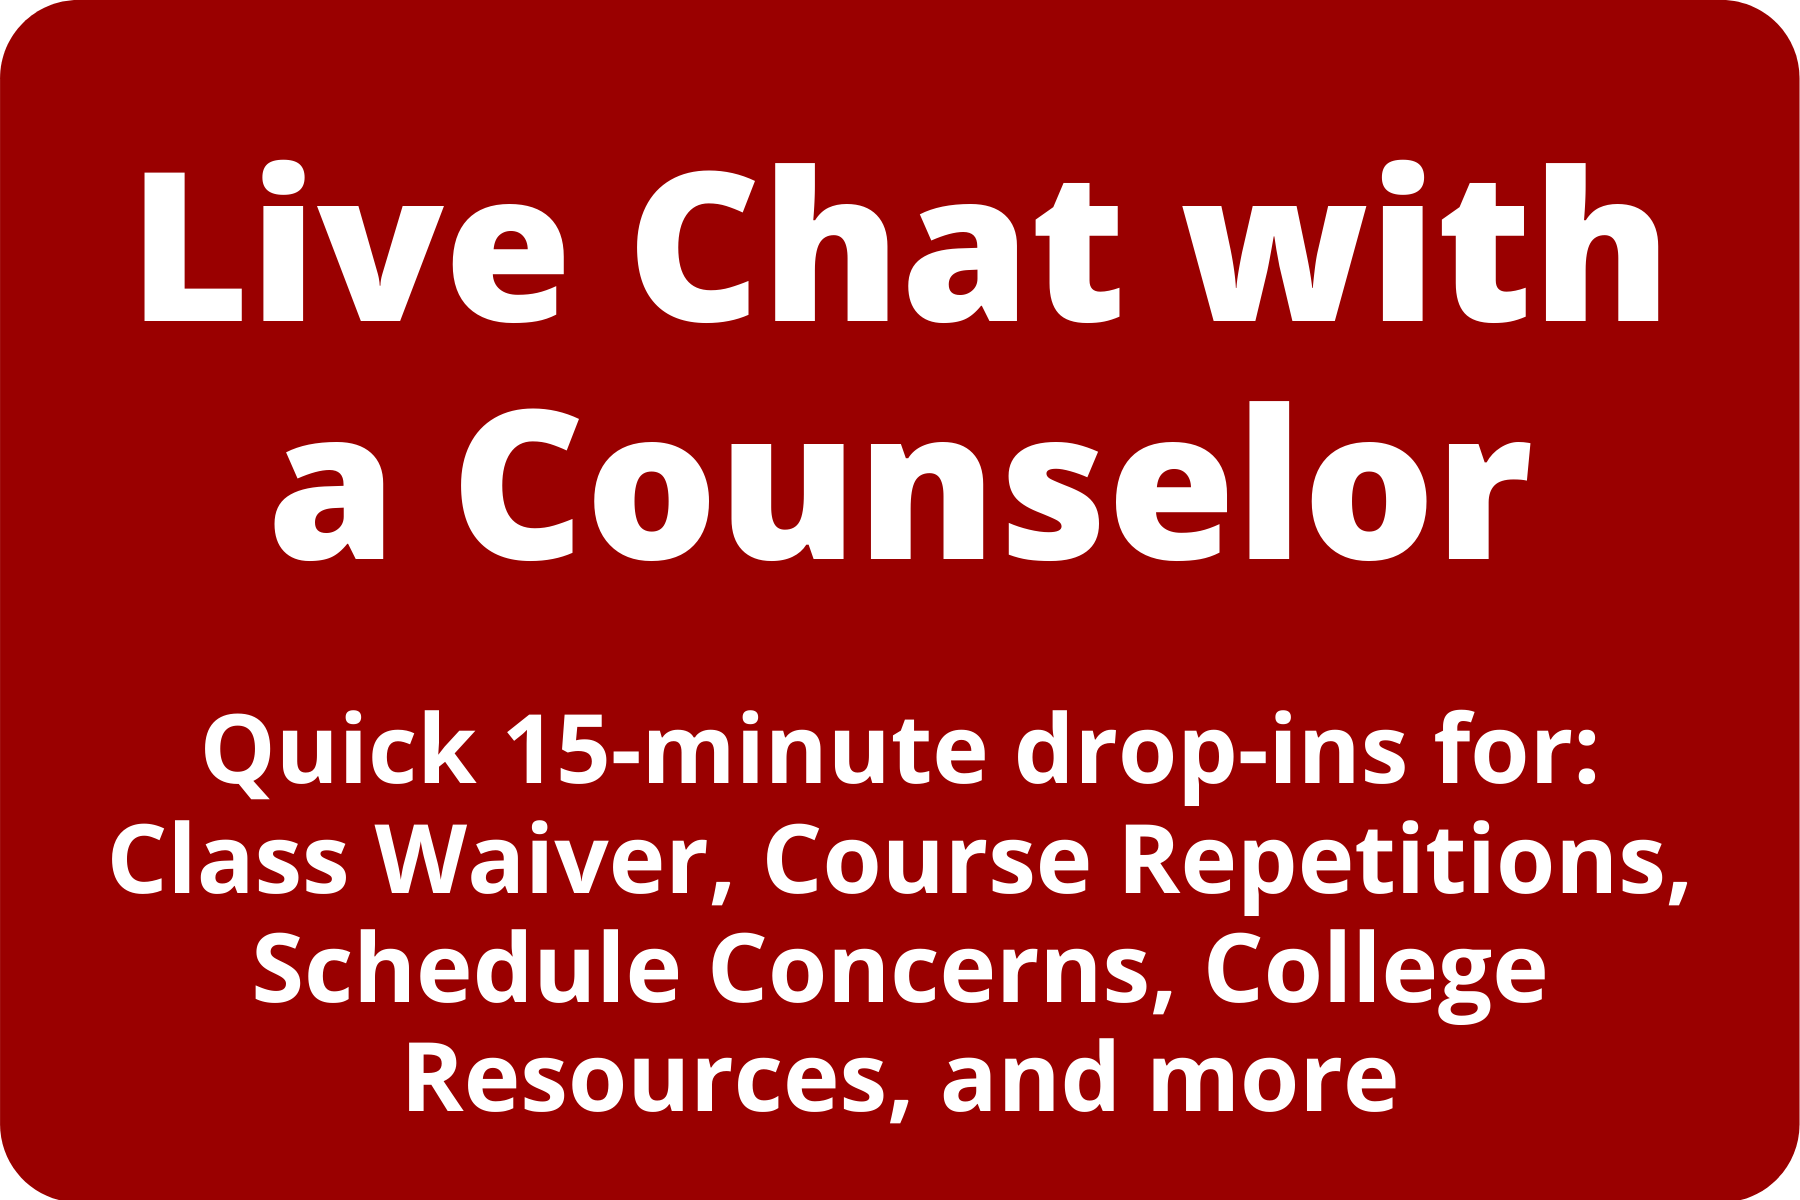 Live Chat with a Counselor. Quick 15-minute drop-ins.